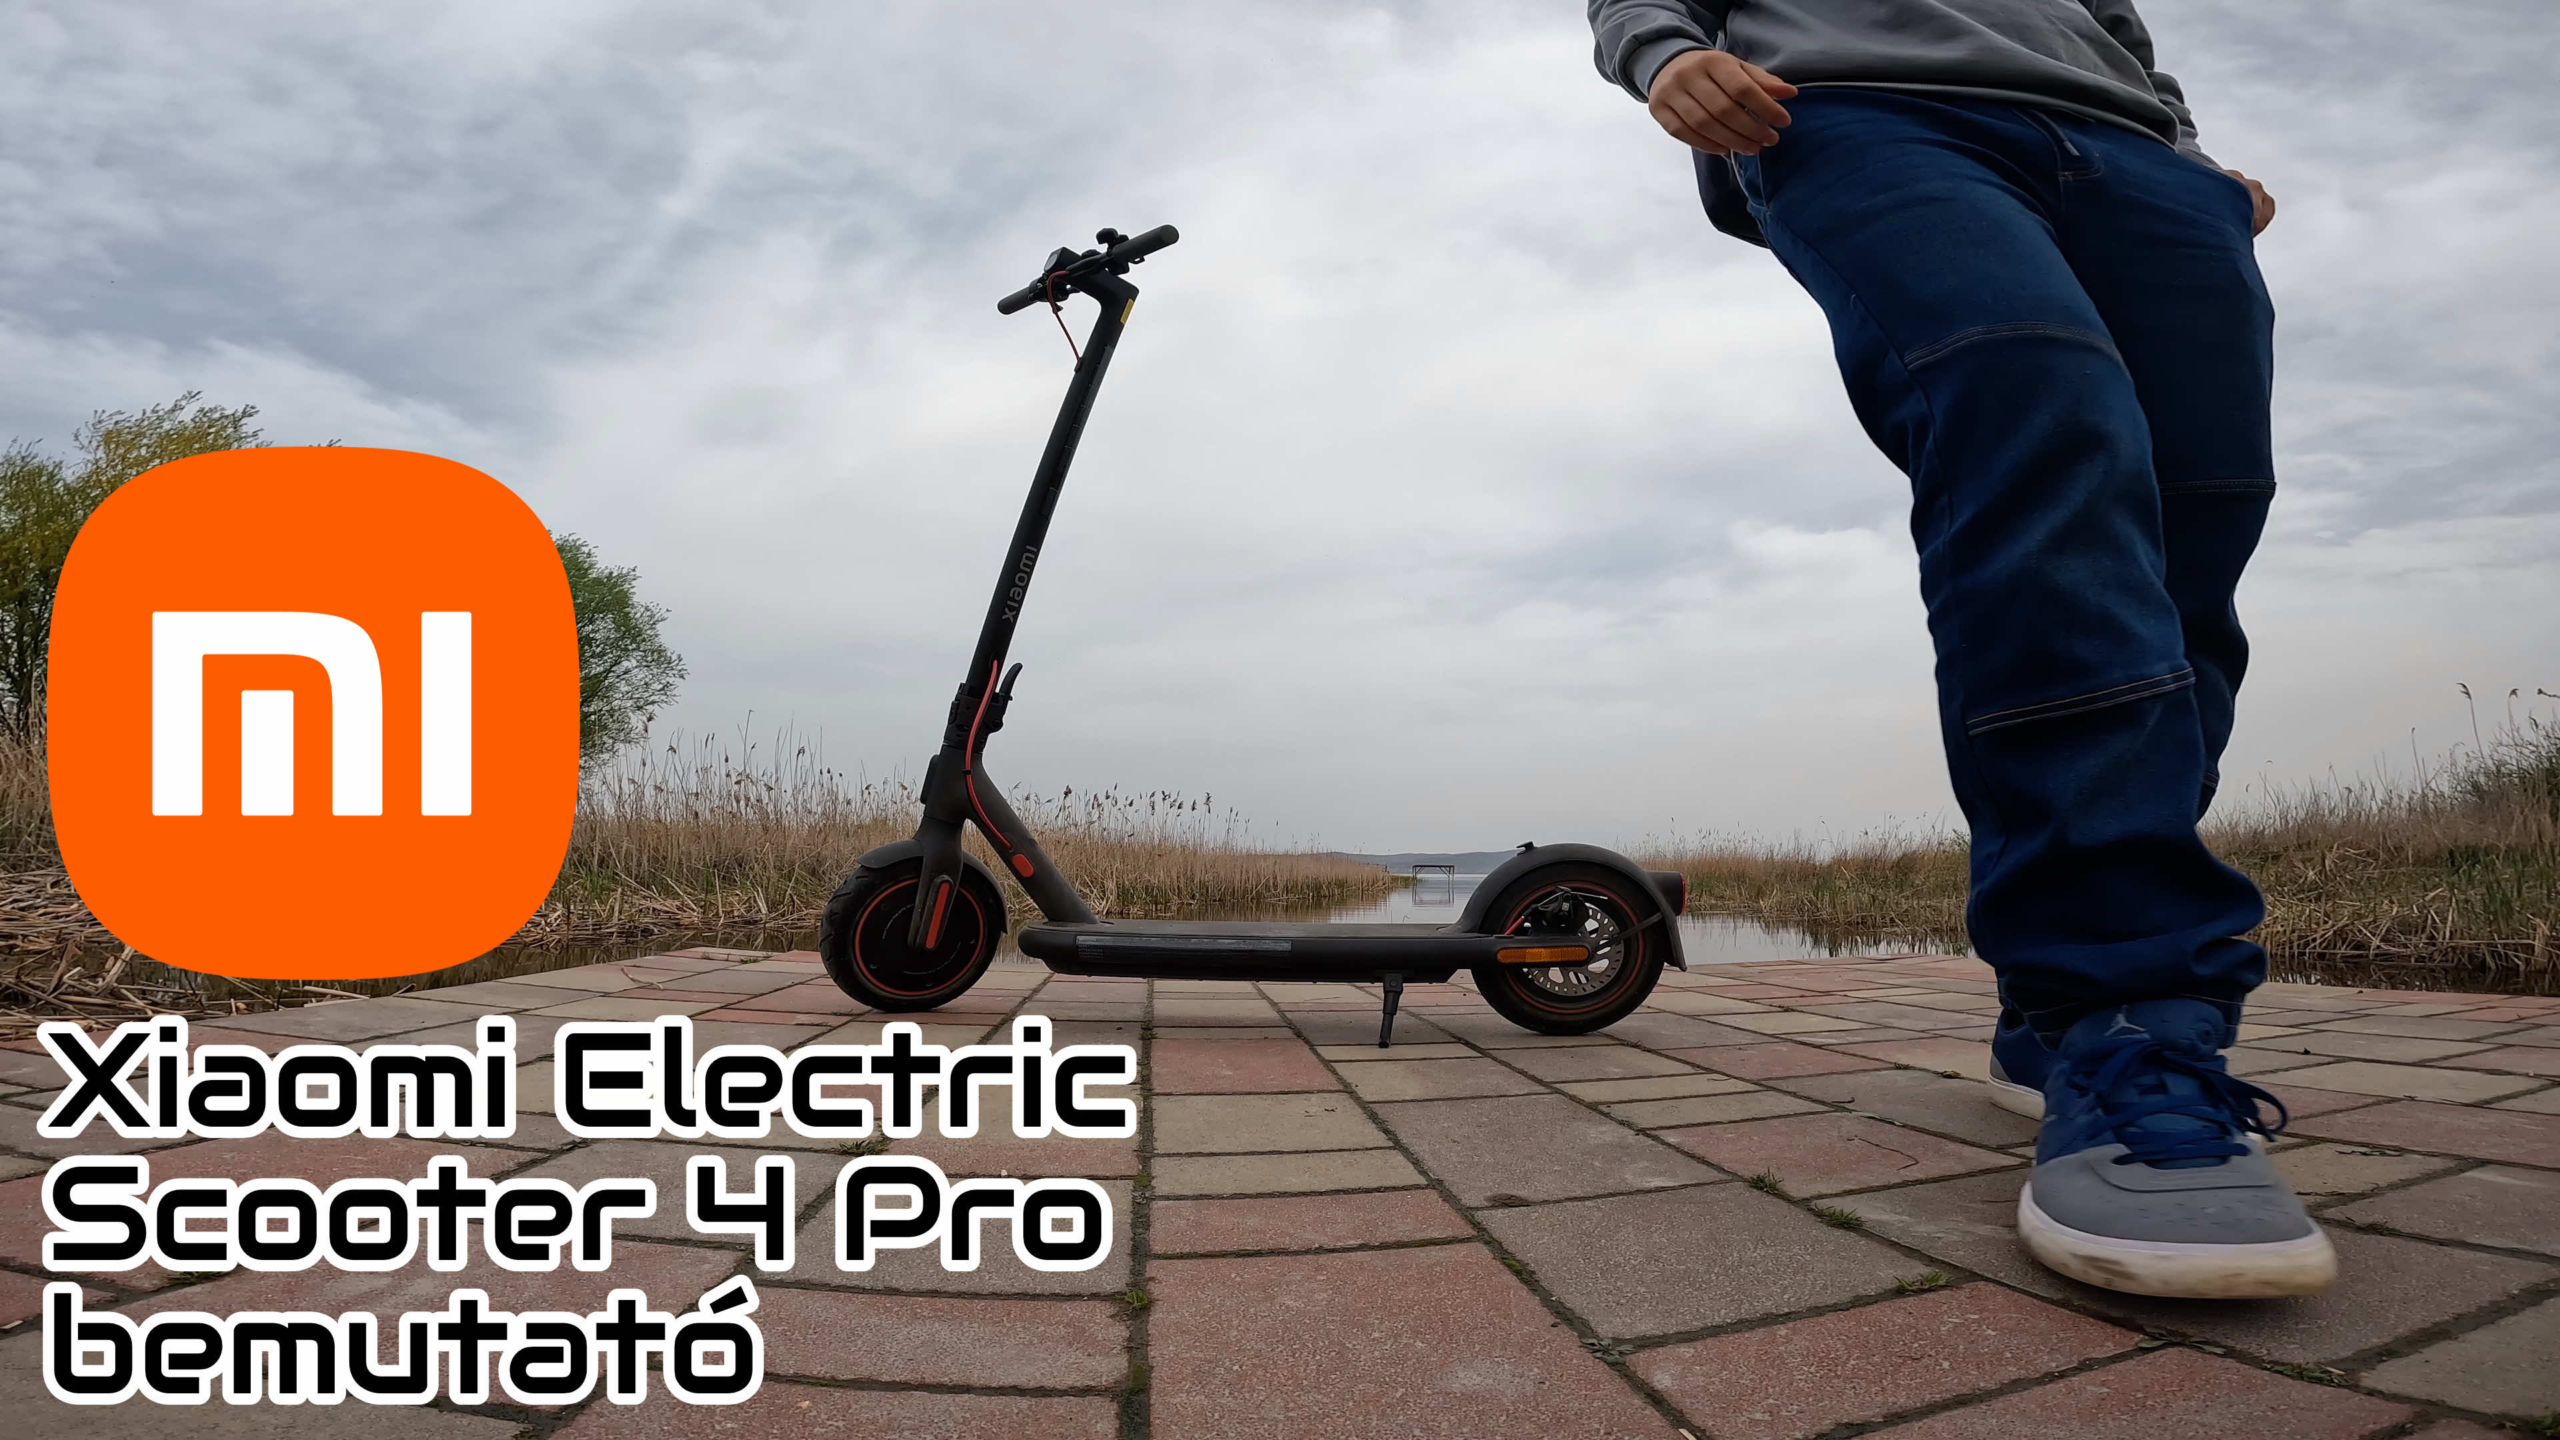 Xiaomi Electric Scooter 4 Pro bemutato cover scaled